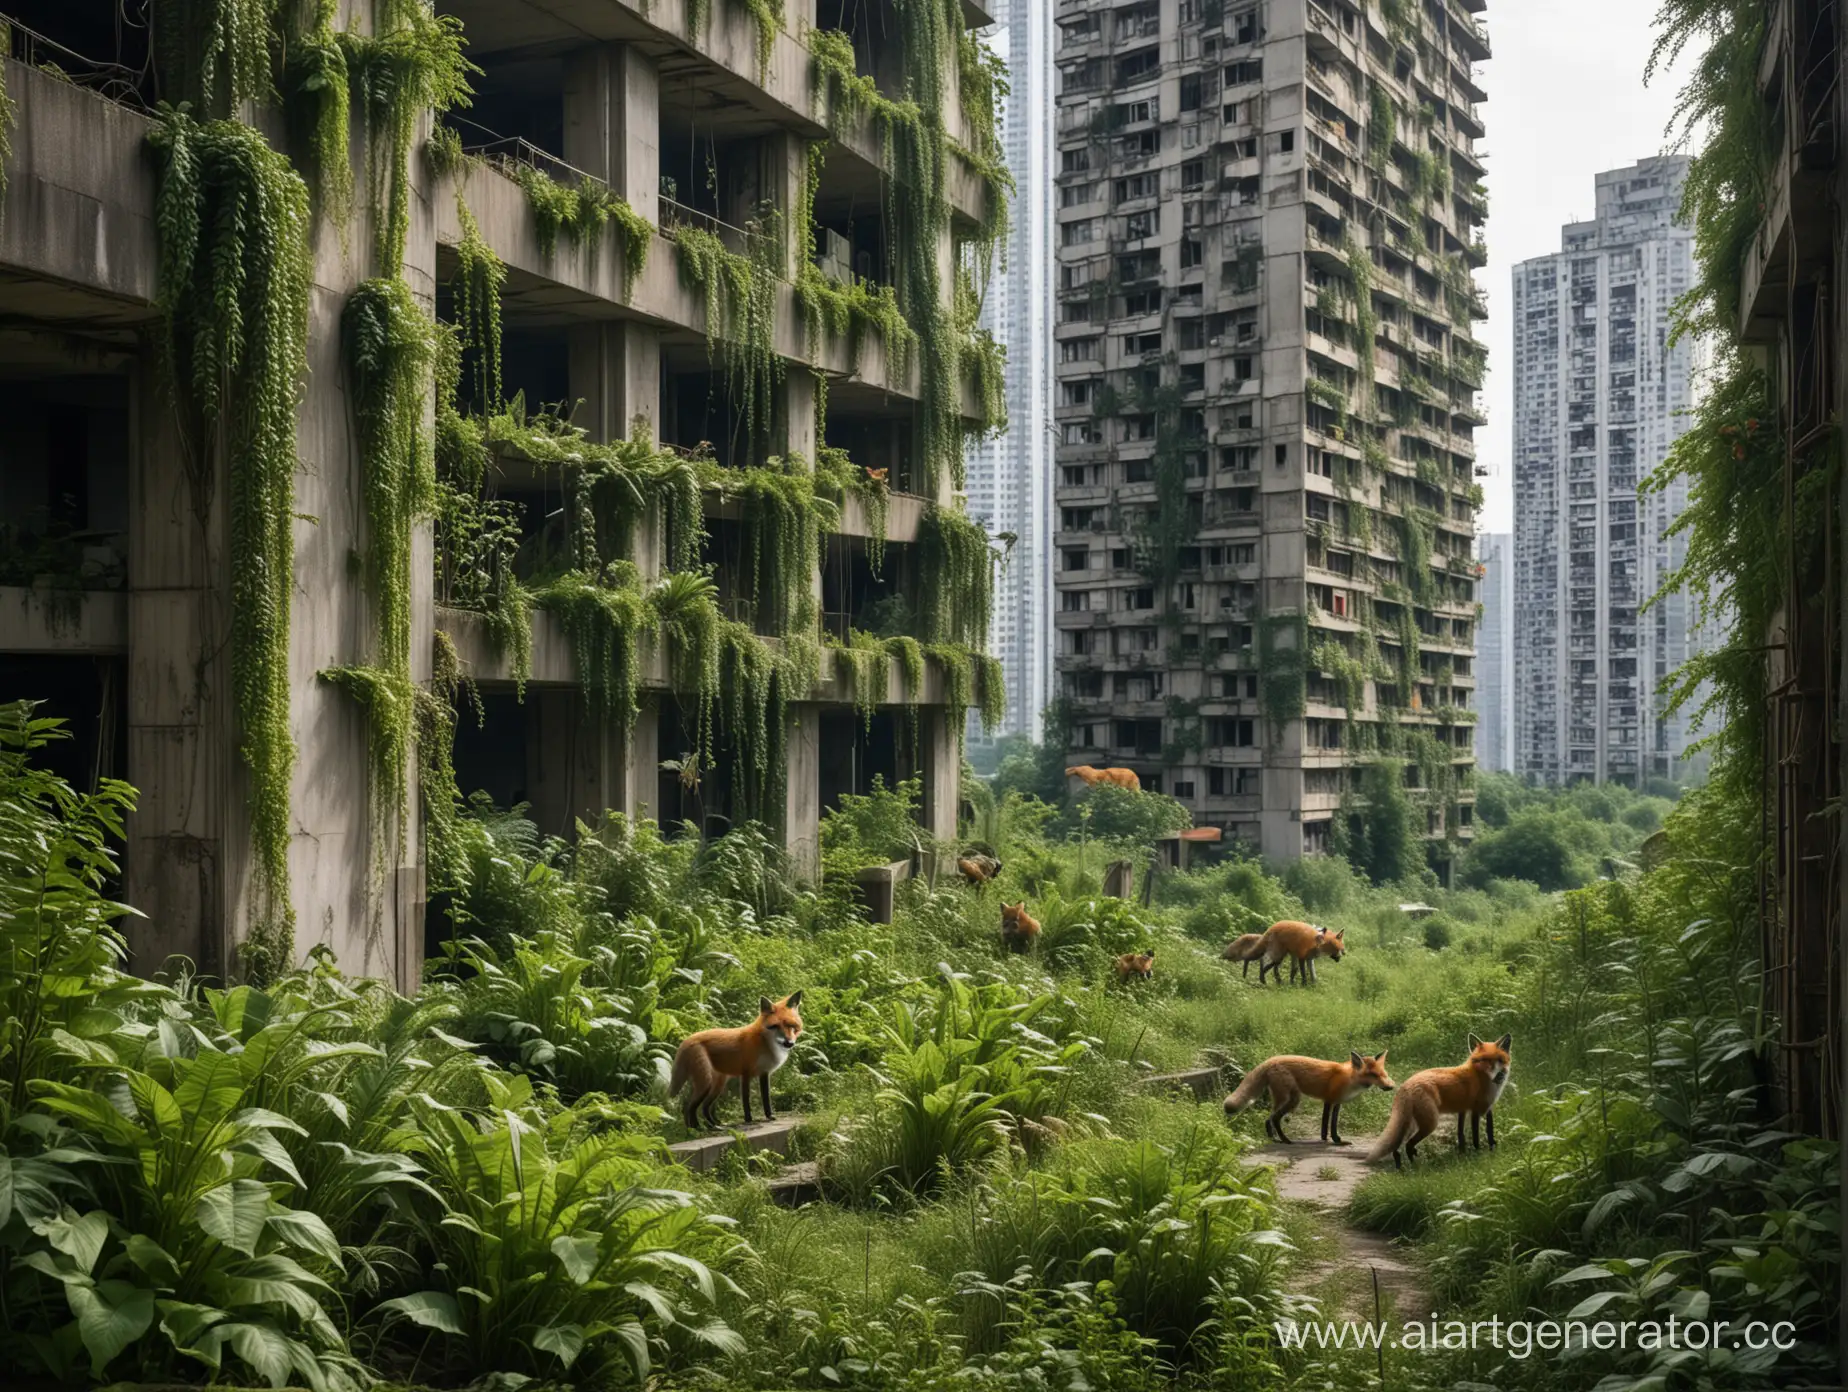 Urban-Jungle-Family-of-Foxes-Exploring-Abandoned-HighRise-City